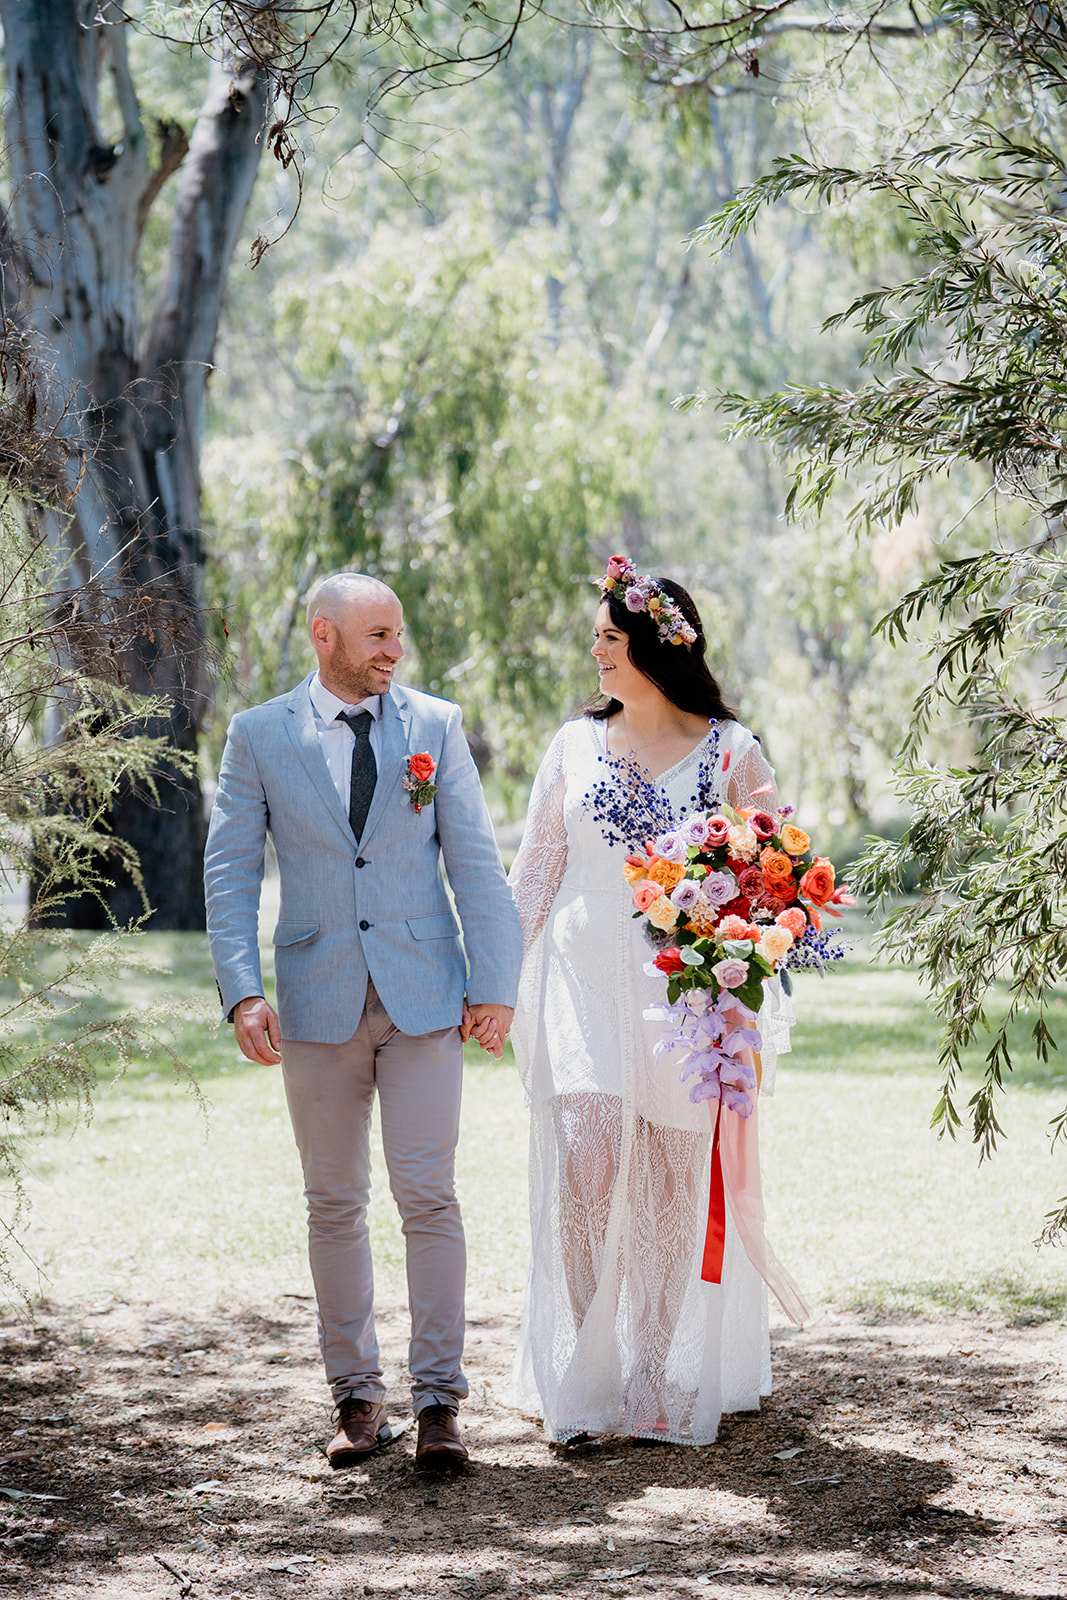 Candid bride and groom photo. Natural wedding photography. Outdoor wedding photo. Albury wedding photographer.